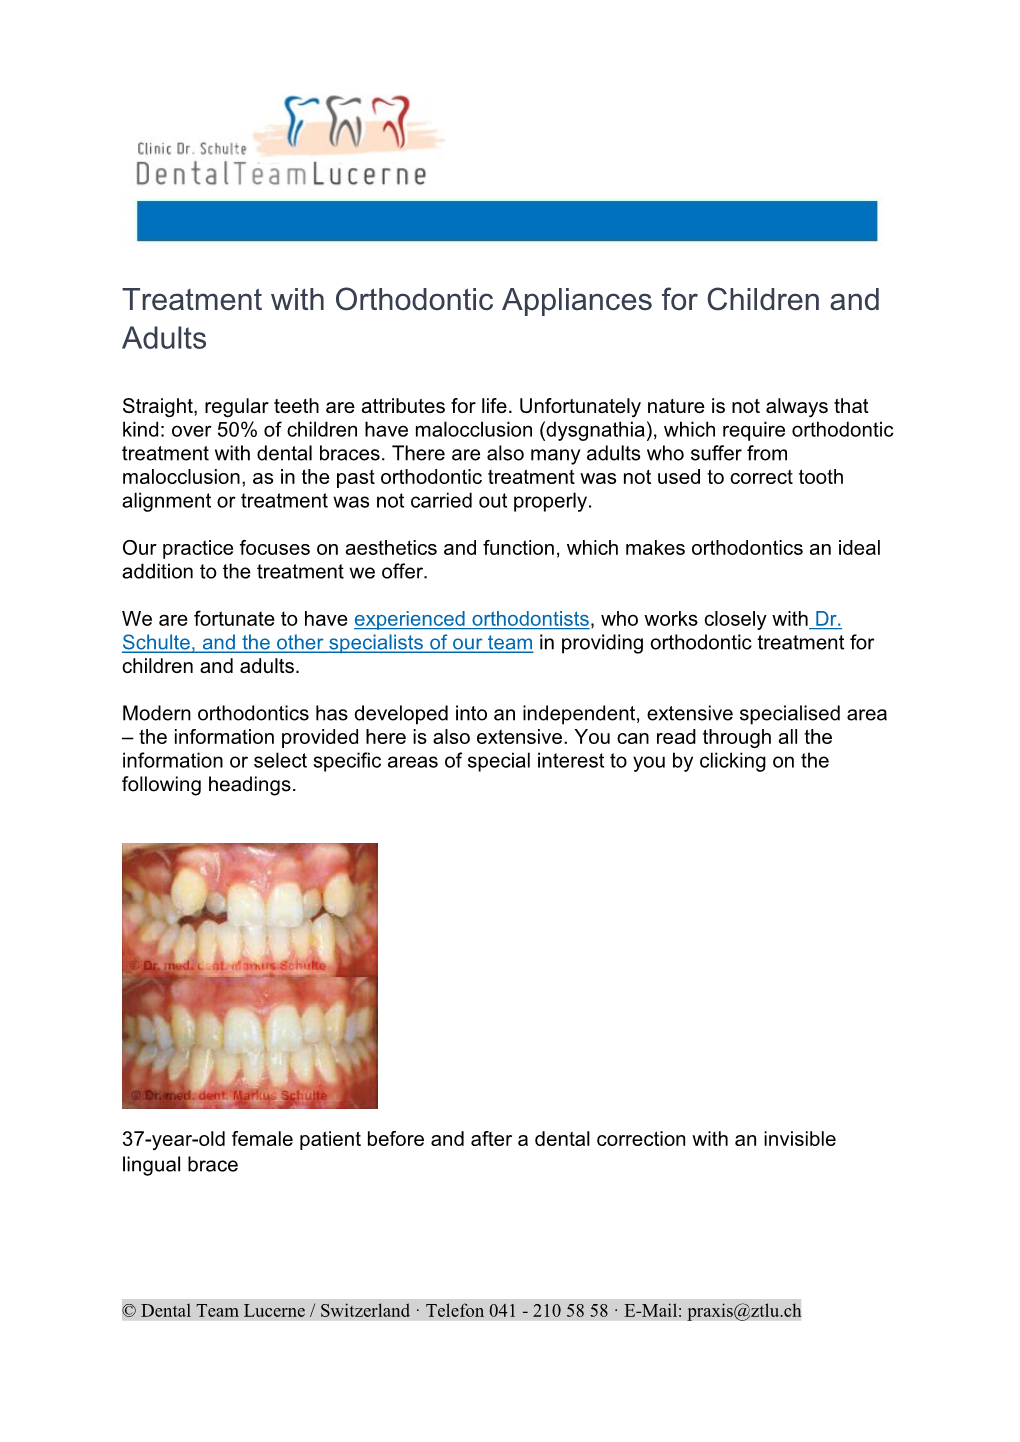 Treatment with Orthodontic Appliances for Children and Adults